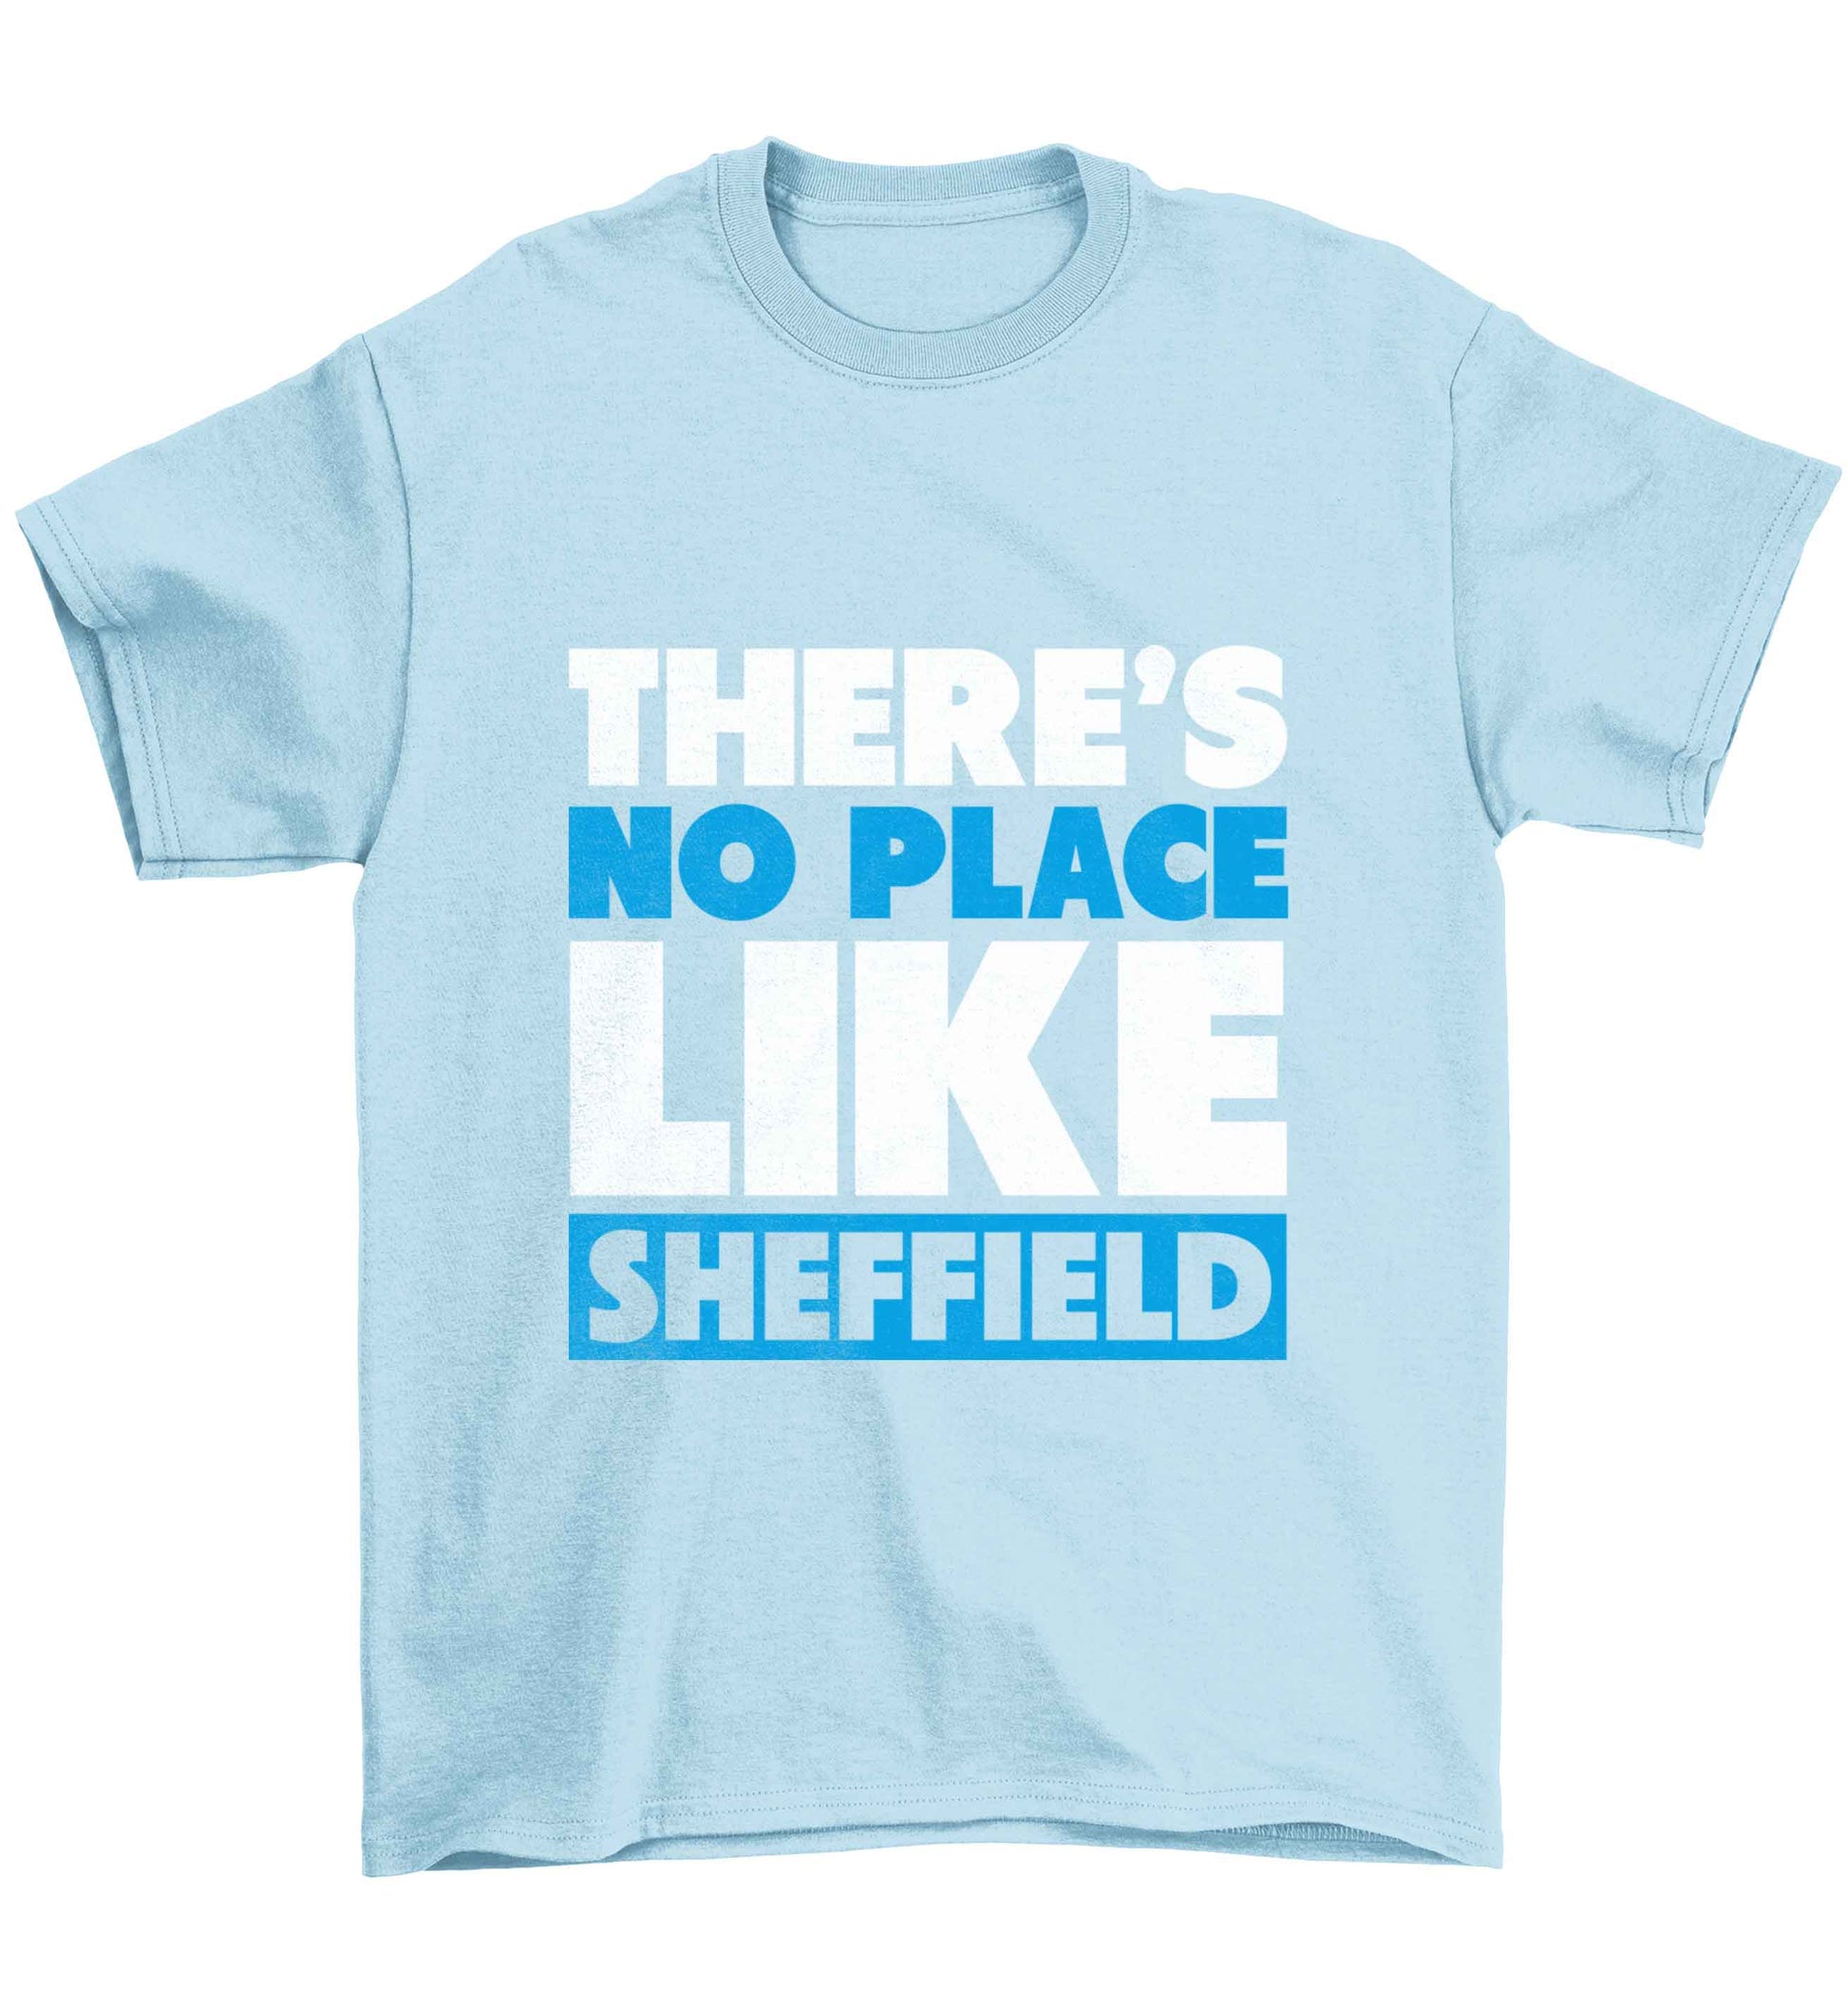 There's no place like Sheffield Children's light blue Tshirt 12-13 Years